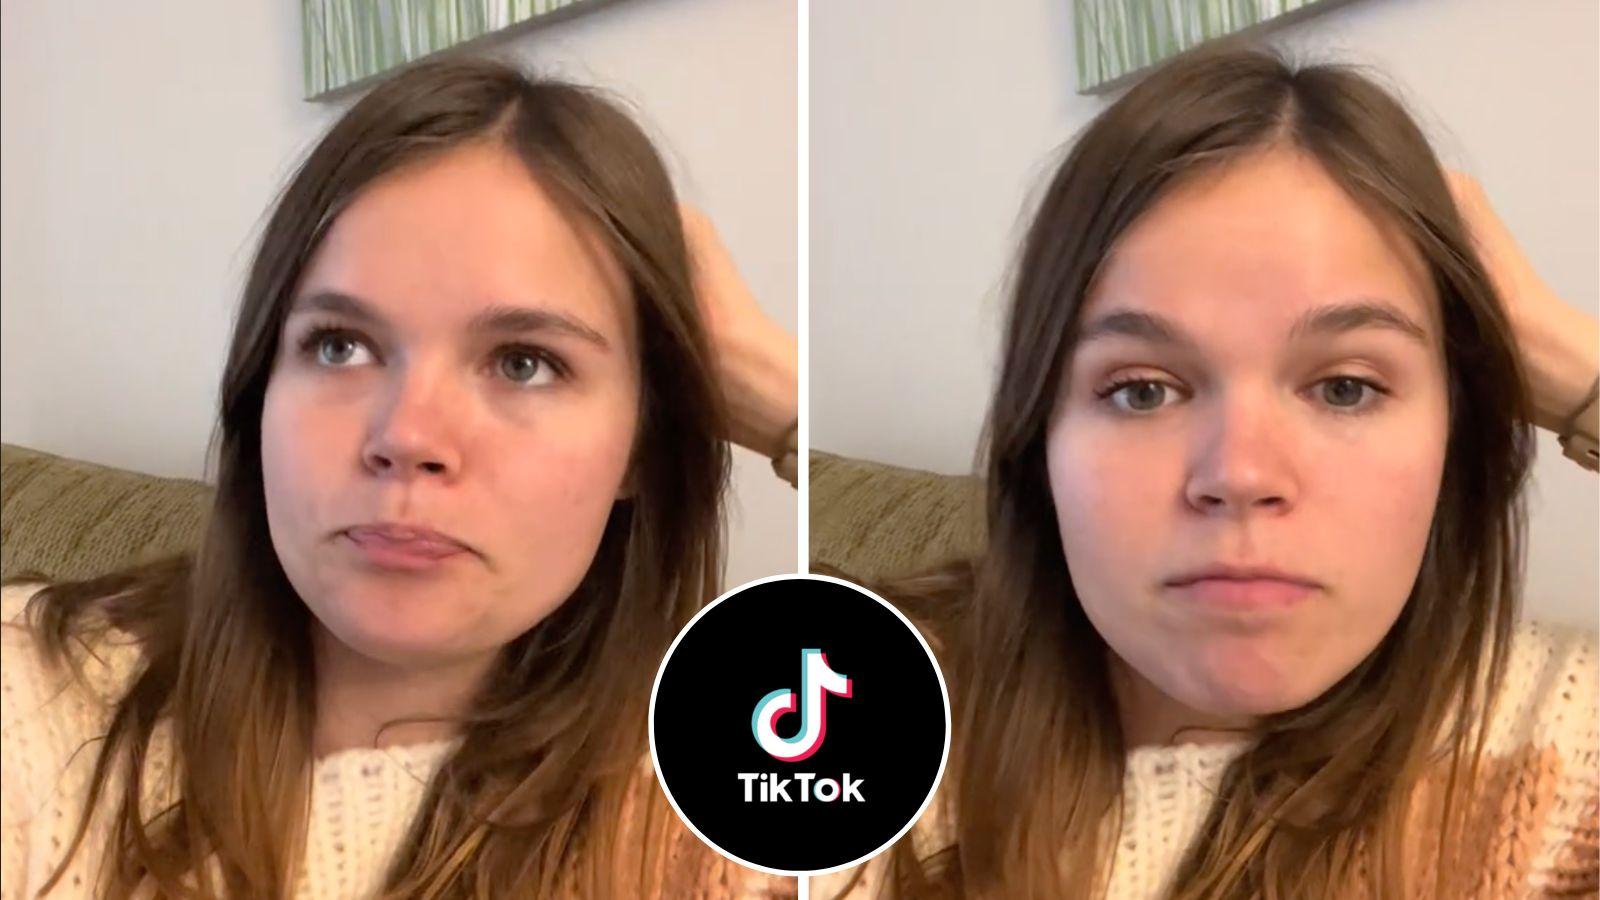 TikTok could be Walmart's ticket to young shoppers